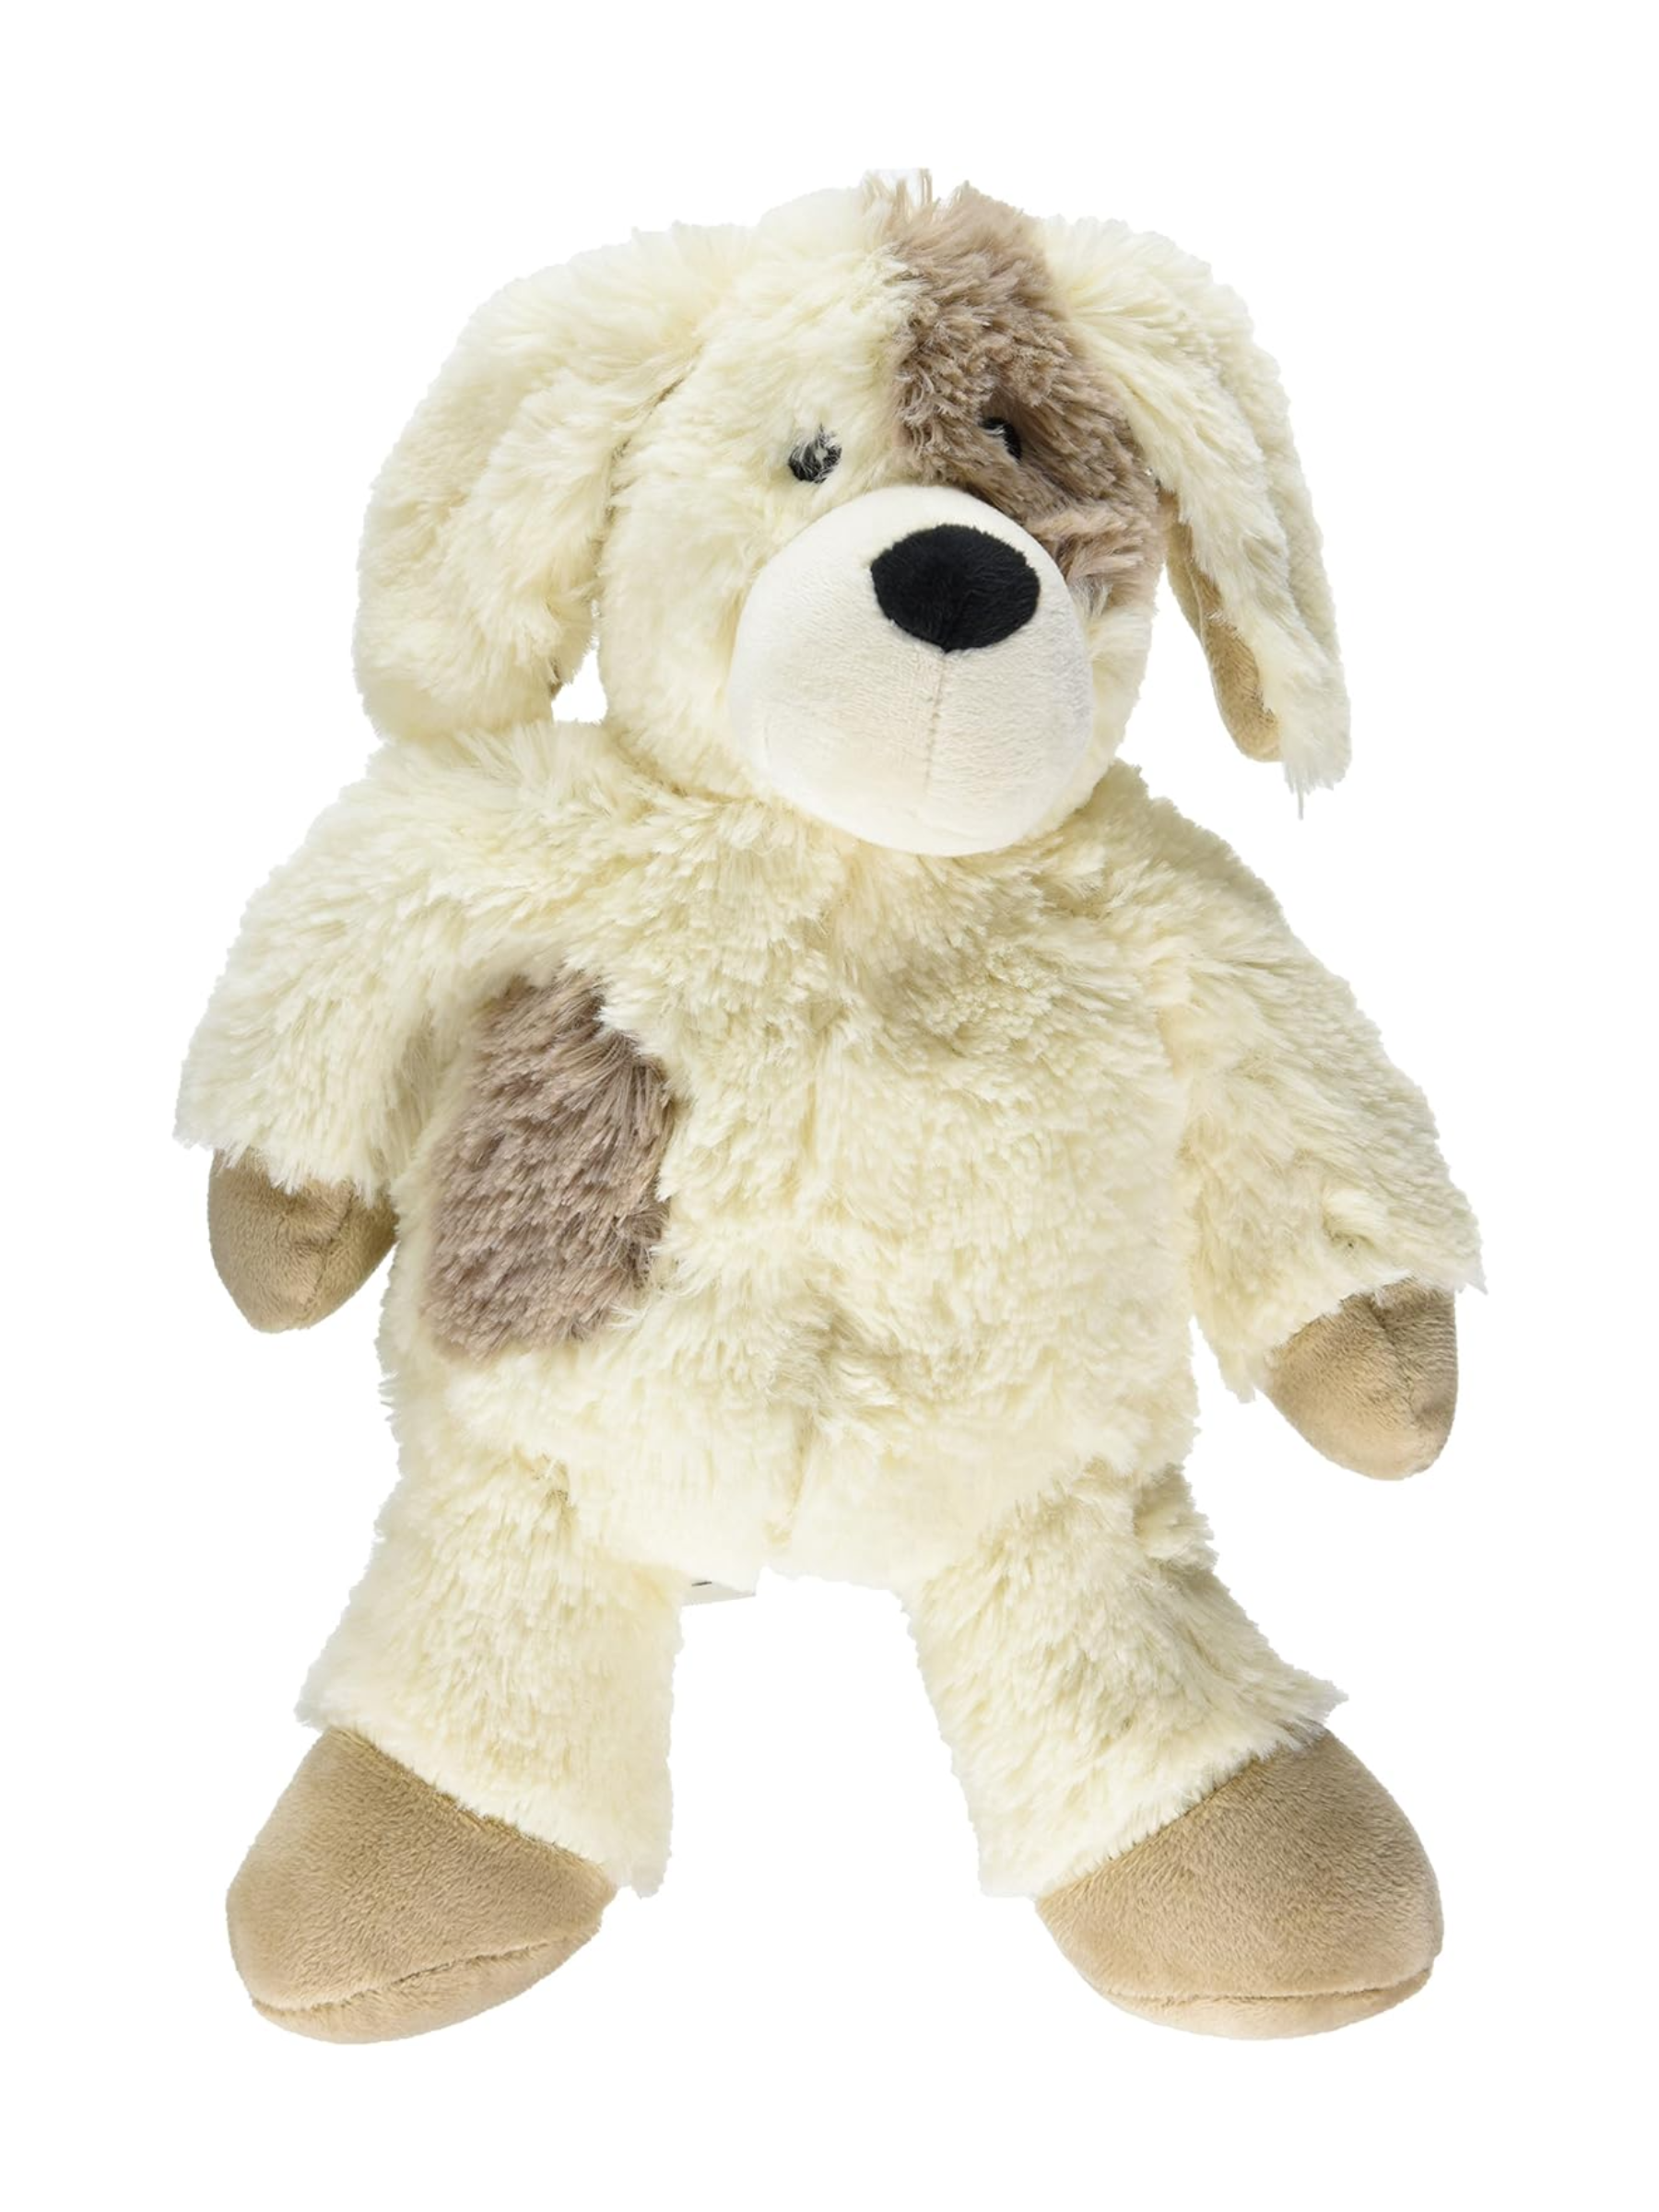 <p>This innovative stuffed toy is not only a cuddly friend, it's a warm one—literally. Warmies can be heated up in the microwave, so they are an extra cozy snuggle buddy in the cold months.</p> <p><strong>What our expert says:</strong> My parents gifted my twins a set of Warmies, and they instantly became a game changer this winter. We'd pop them in the microwave before walking in the stroller to keep them warm, then again at bedtime to maximize the soothing effects of the French lavender scent. Warmies can also be used as a cold pack by placing them in the freezer, a trick I have no doubt we'll be employing this summer. <em>-<a href="https://www.glamour.com/contributor/anna-moeslein?mbid=synd_msn_rss&utm_source=msn&utm_medium=syndication">Anna Moeslein</a>, Glamour Deputy Editor</em></p> $28, Amazon. <a href="https://www.amazon.com/Warmies%C2%AE-Microwavable-French-Lavender-Scented/dp/B00202CITM/?">Get it now!</a><p>Sign up for today’s biggest stories, from pop culture to politics.</p><a href="https://www.glamour.com/newsletter/news?sourceCode=msnsend">Sign Up</a>